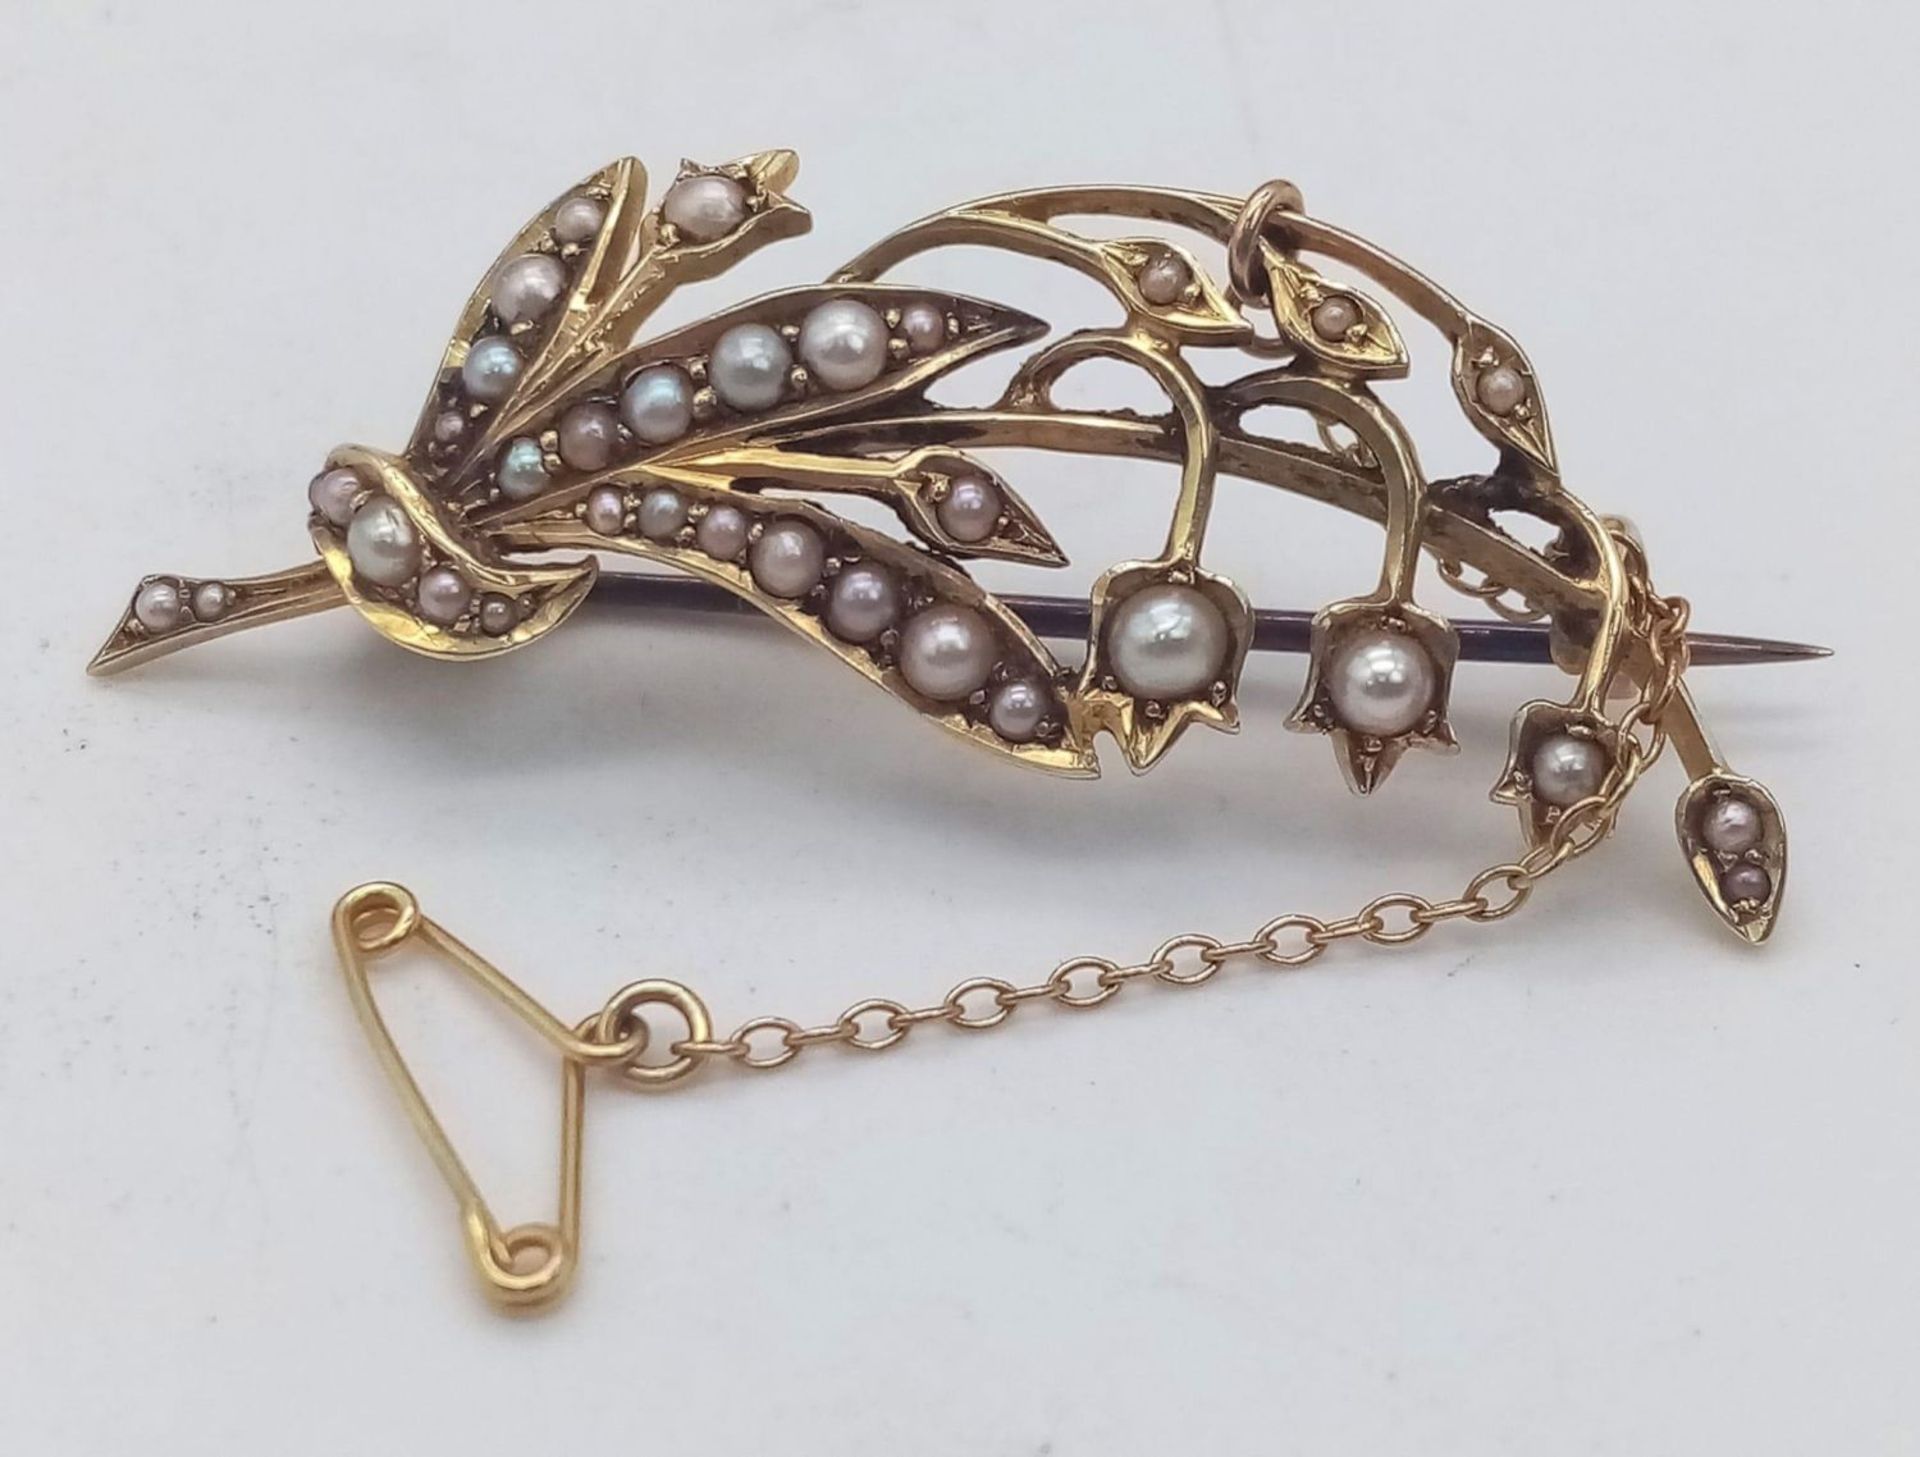 An antique 15 K yellow gold floral brooch with natural seed pearls and security chain, dimensions: - Image 3 of 6